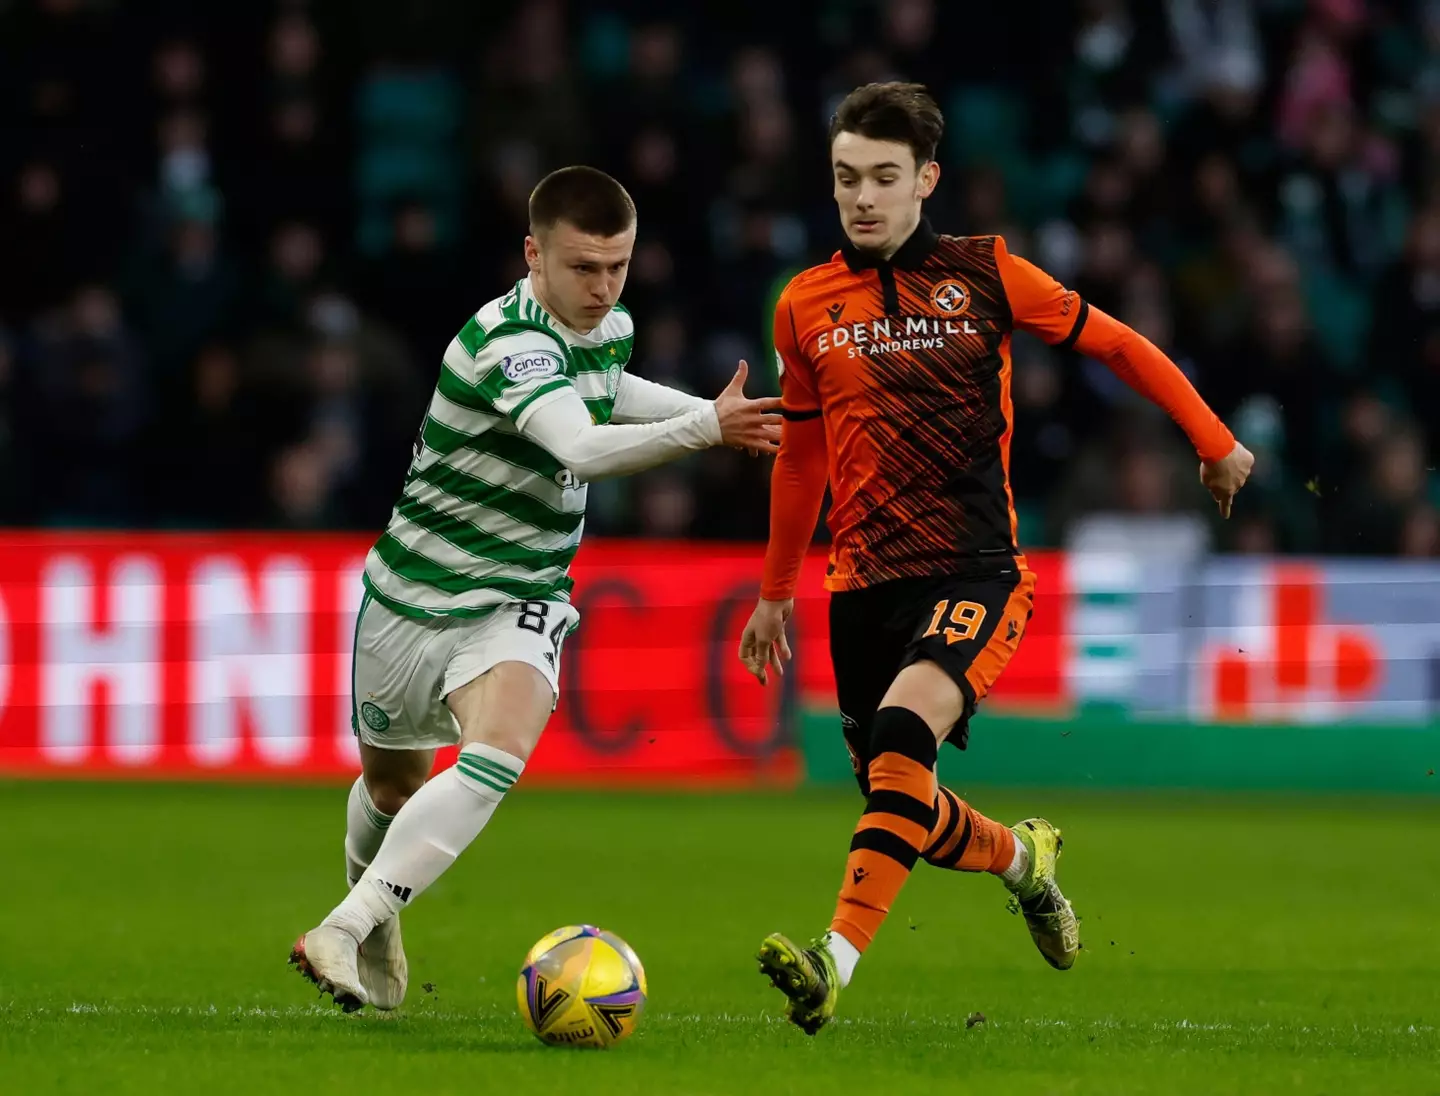 Ben Doak (left) joined Liverpool from Celtic earlier this year (Image: Alamy)